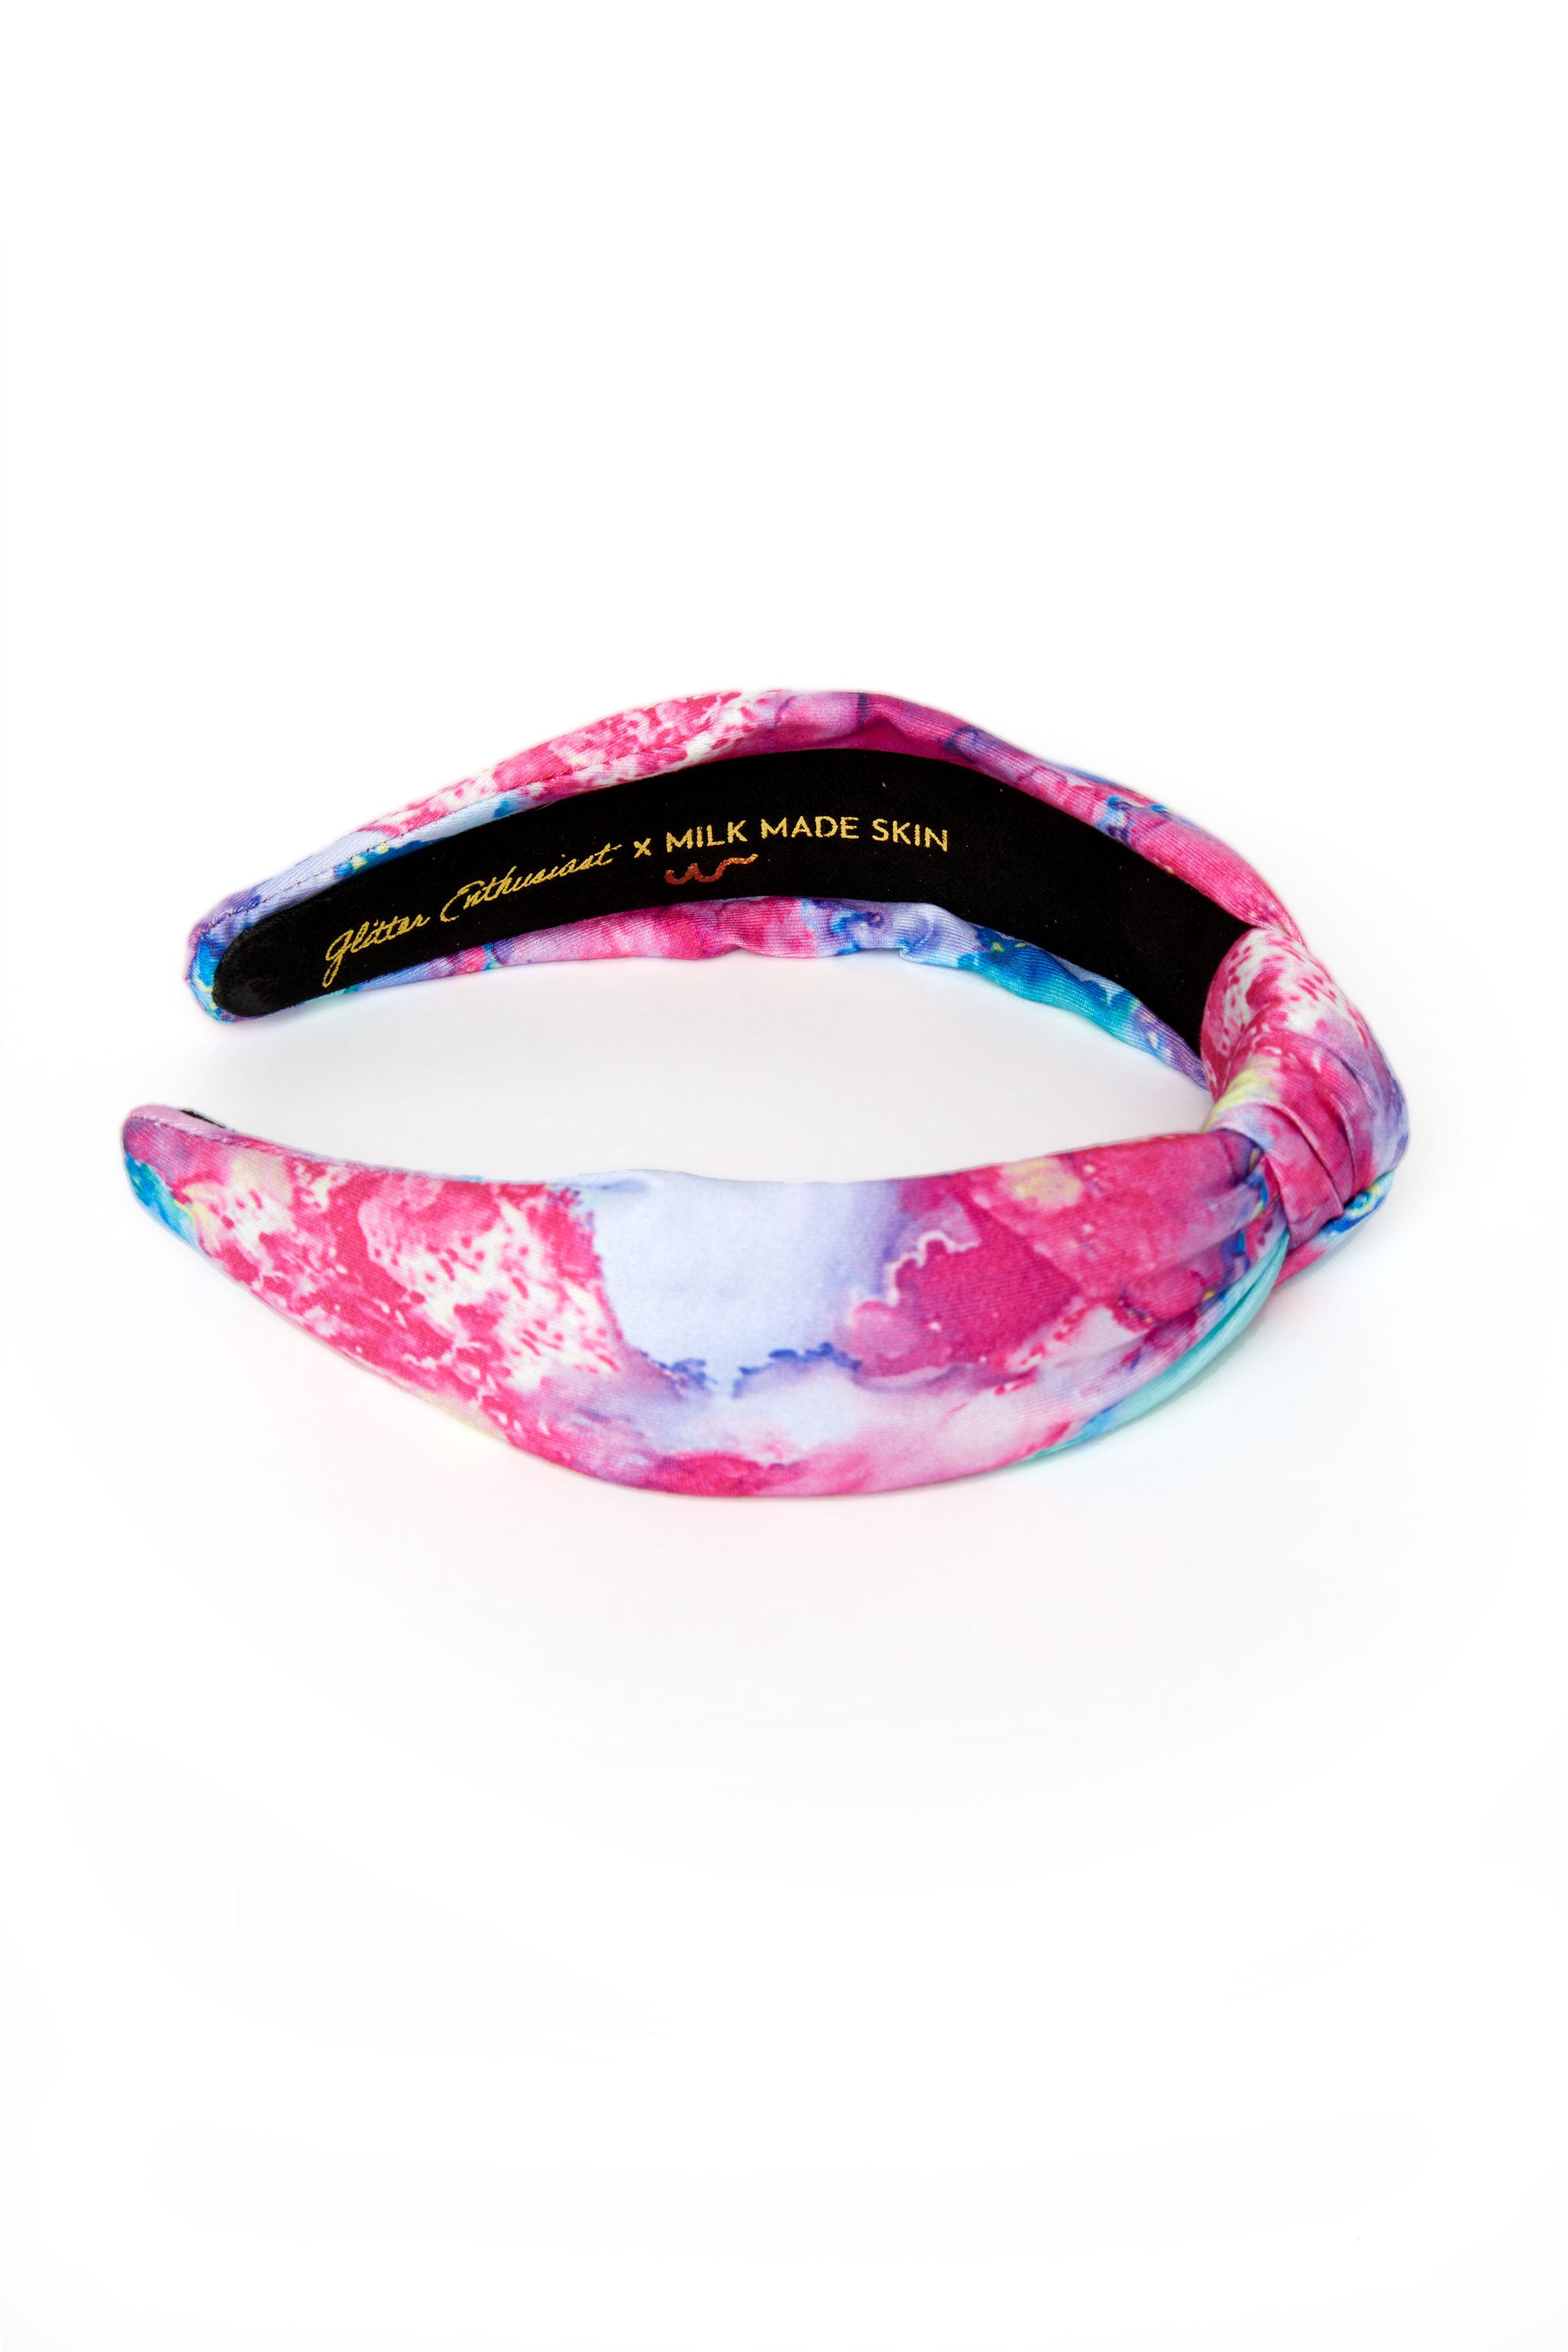 pink marbled pattern top knot headband